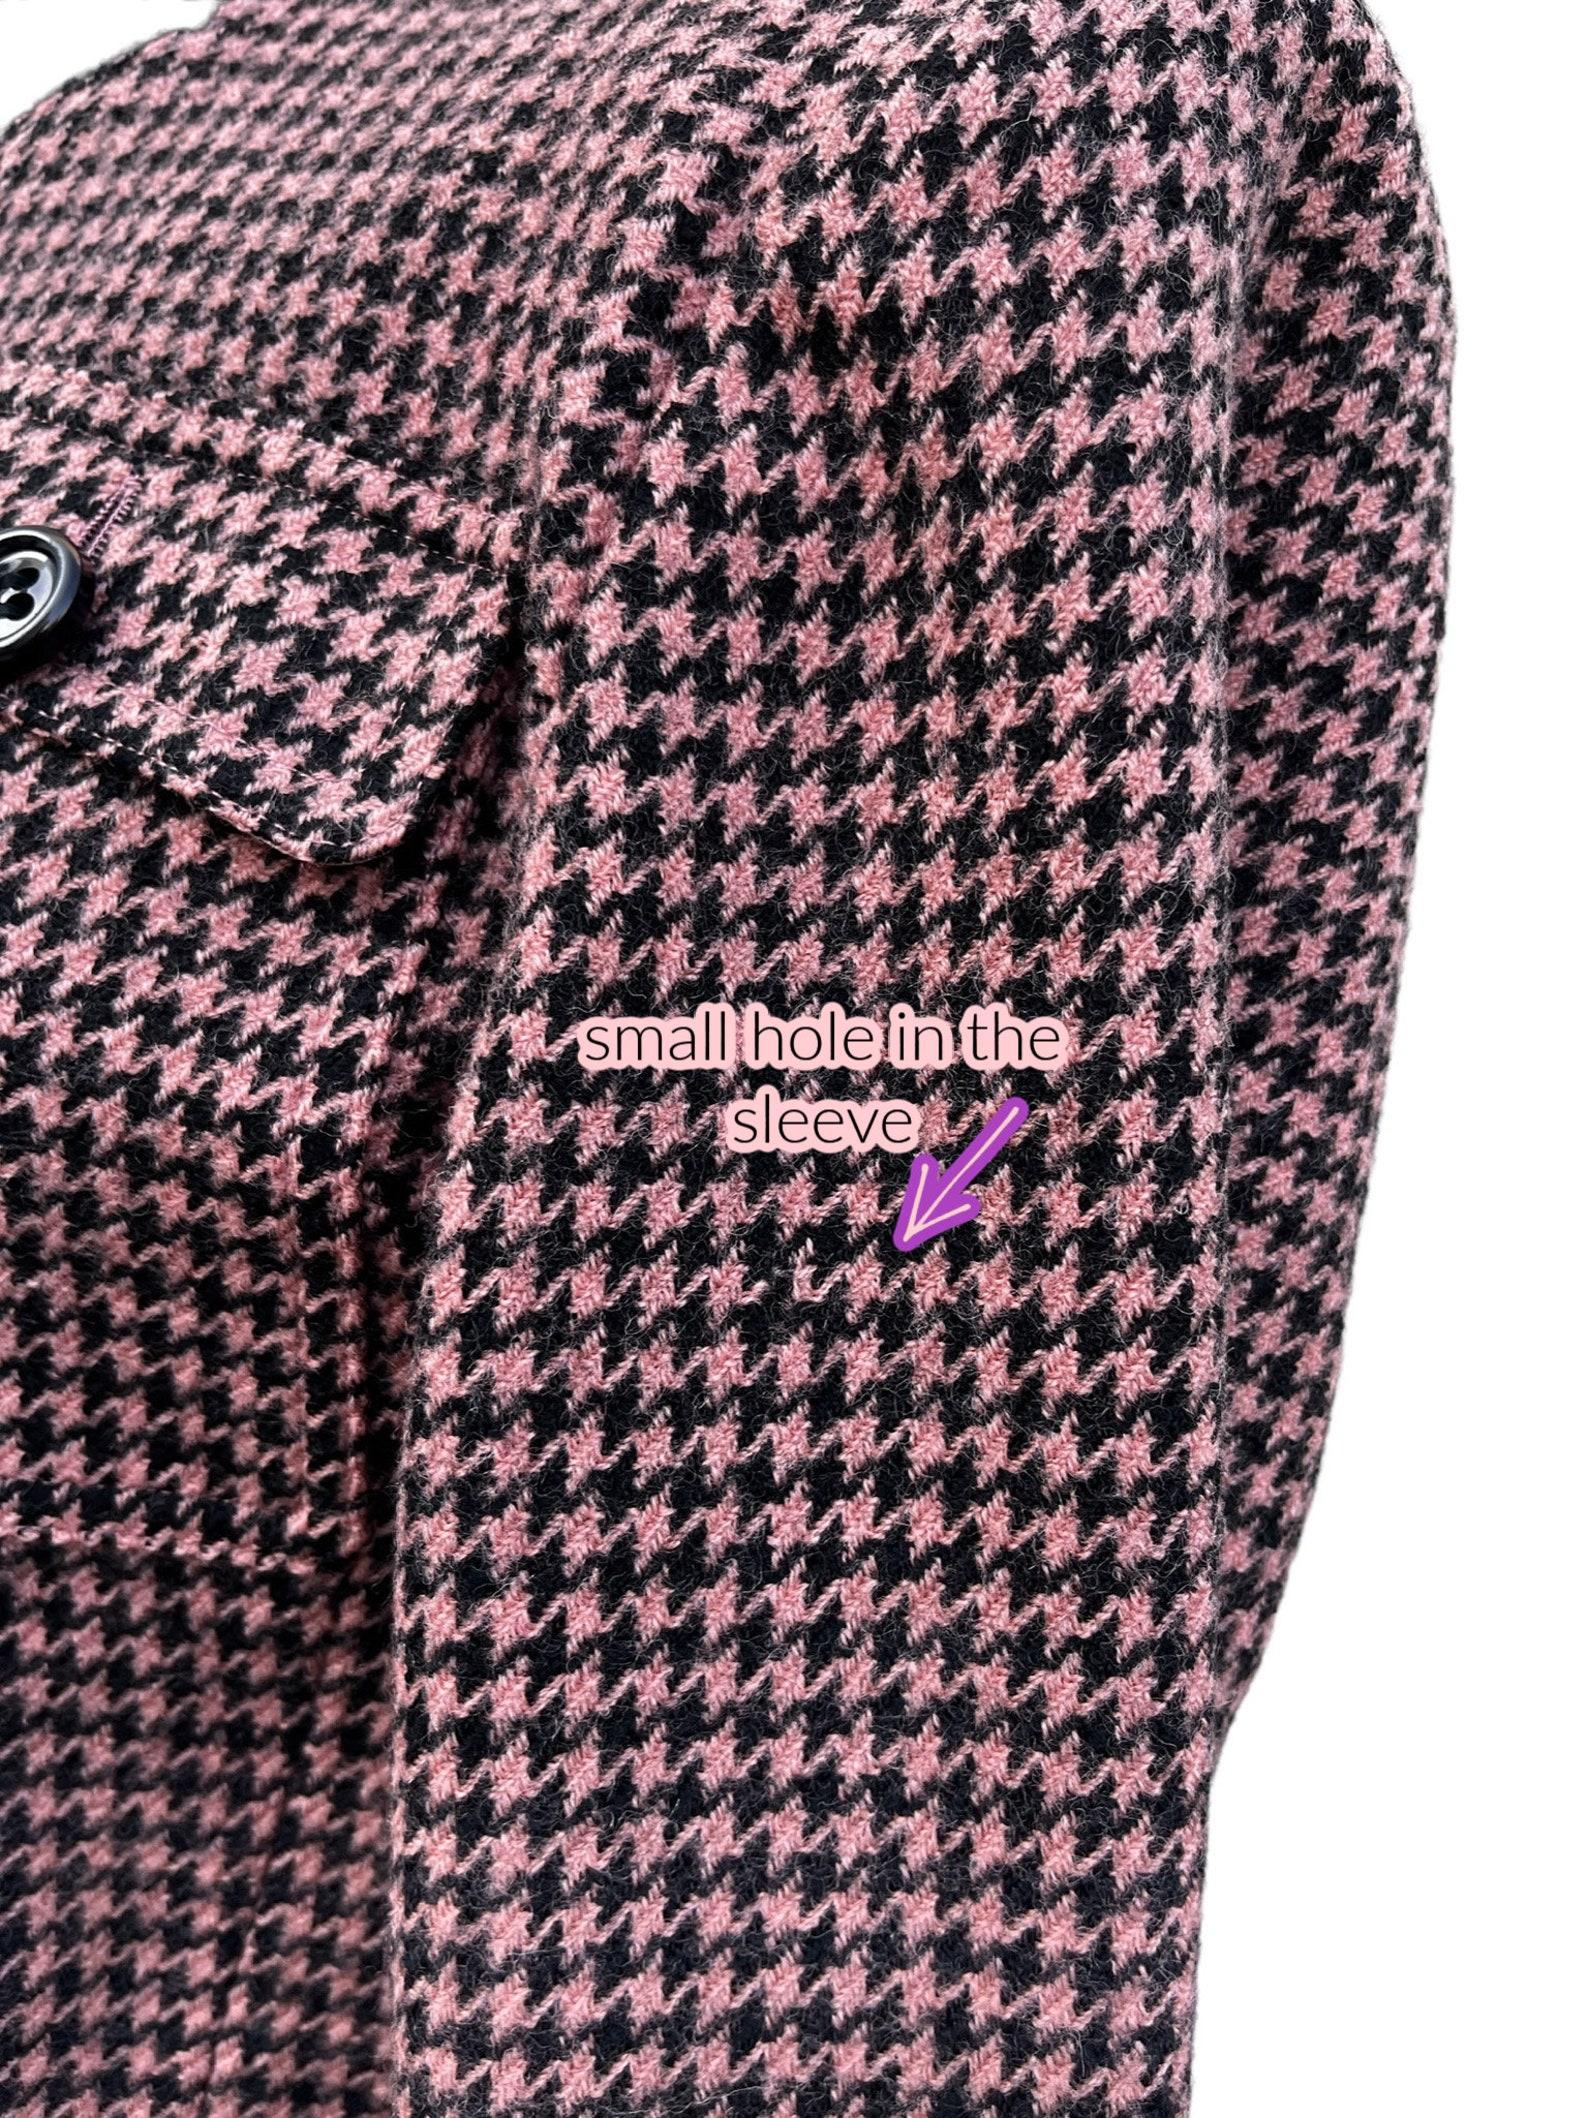 Guy Laroche Houndstooth Jacket, Circa 1980s For Sale 6